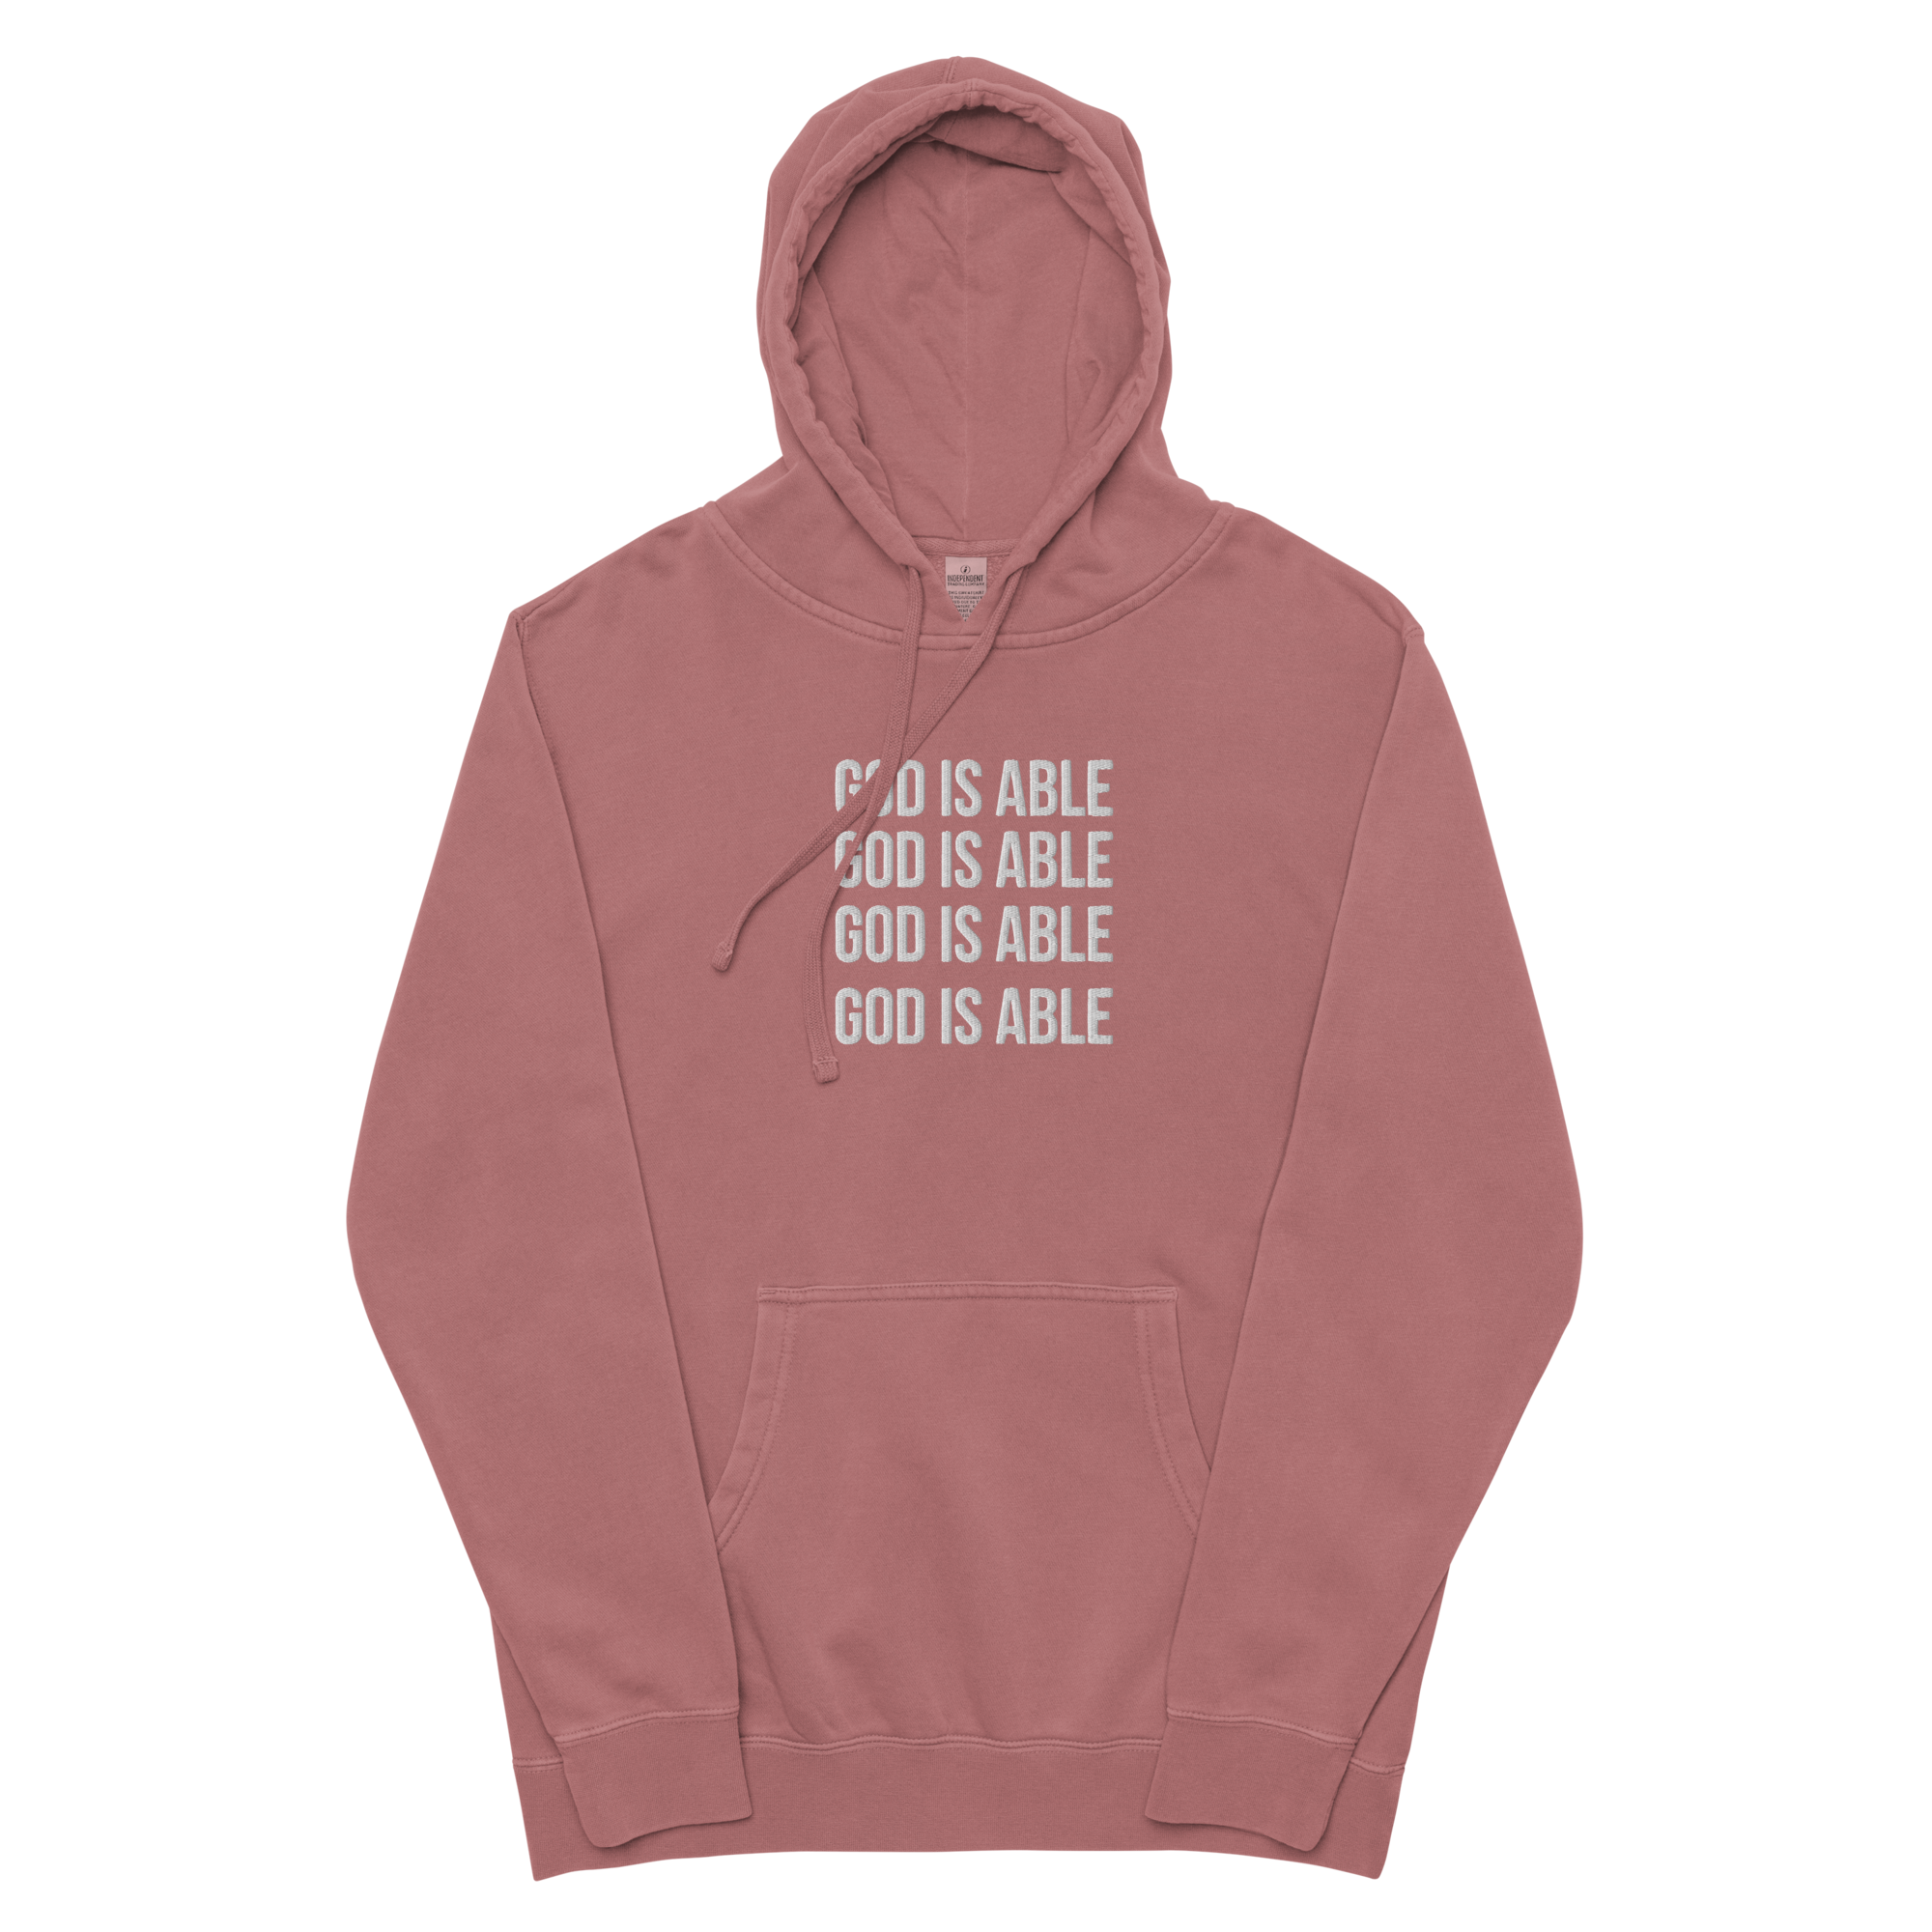 The Mode Hoodie (Embroidered)